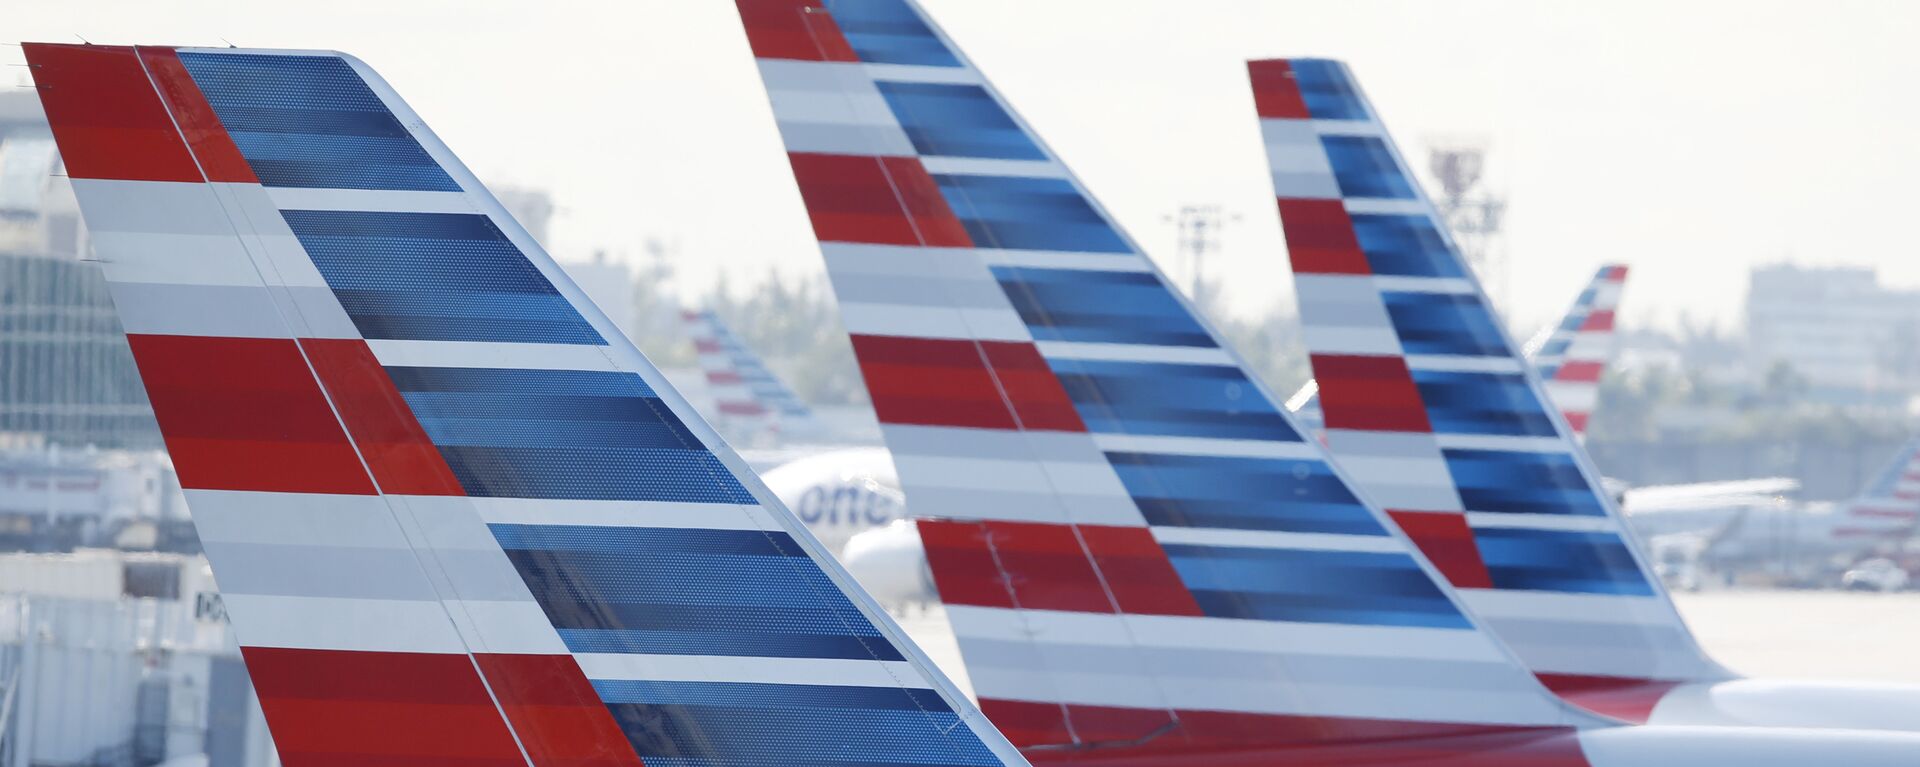 Painted vertical stabilizers are viewed as American Airlines jets are parked on the airport apron, Monday, Nov. 6, 2017, at Miami International Airport in Miami. American Airlines and a subsidiary will pay $9.8 million in stock to settle claims that they failed to help disabled employees return to work. - Sputnik International, 1920, 28.05.2020